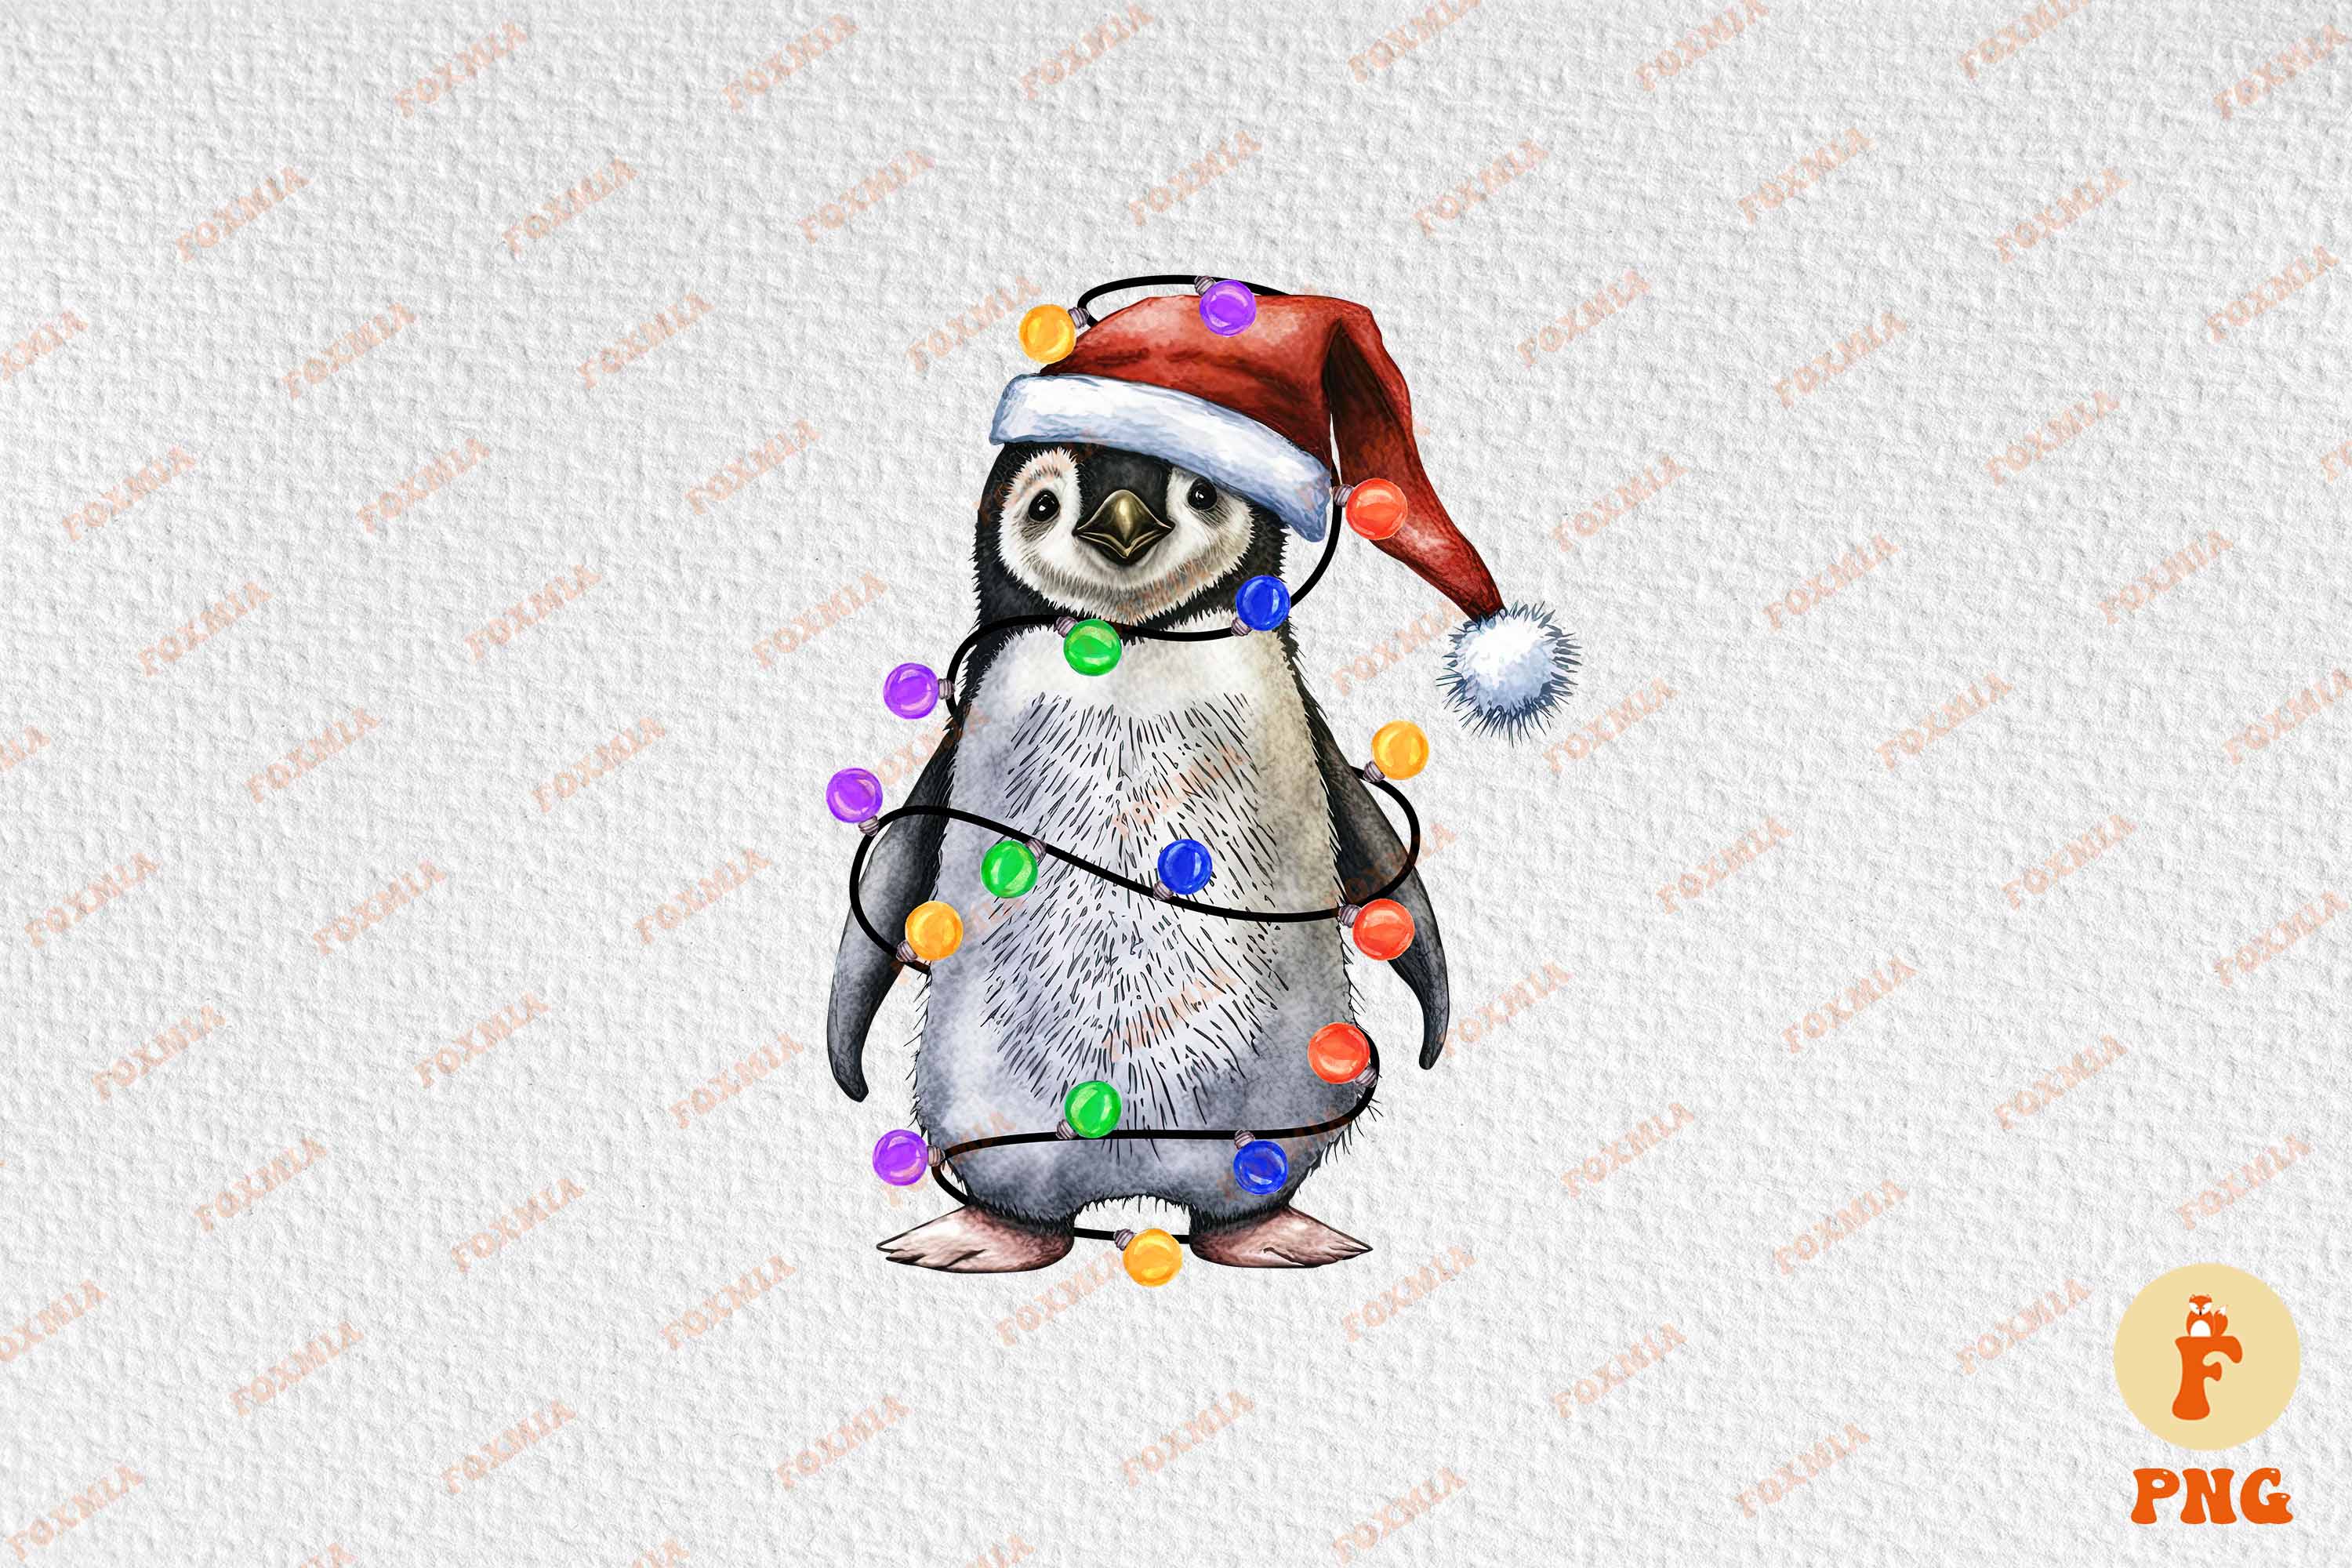 Exquisite image of a penguin wearing a santa hat.